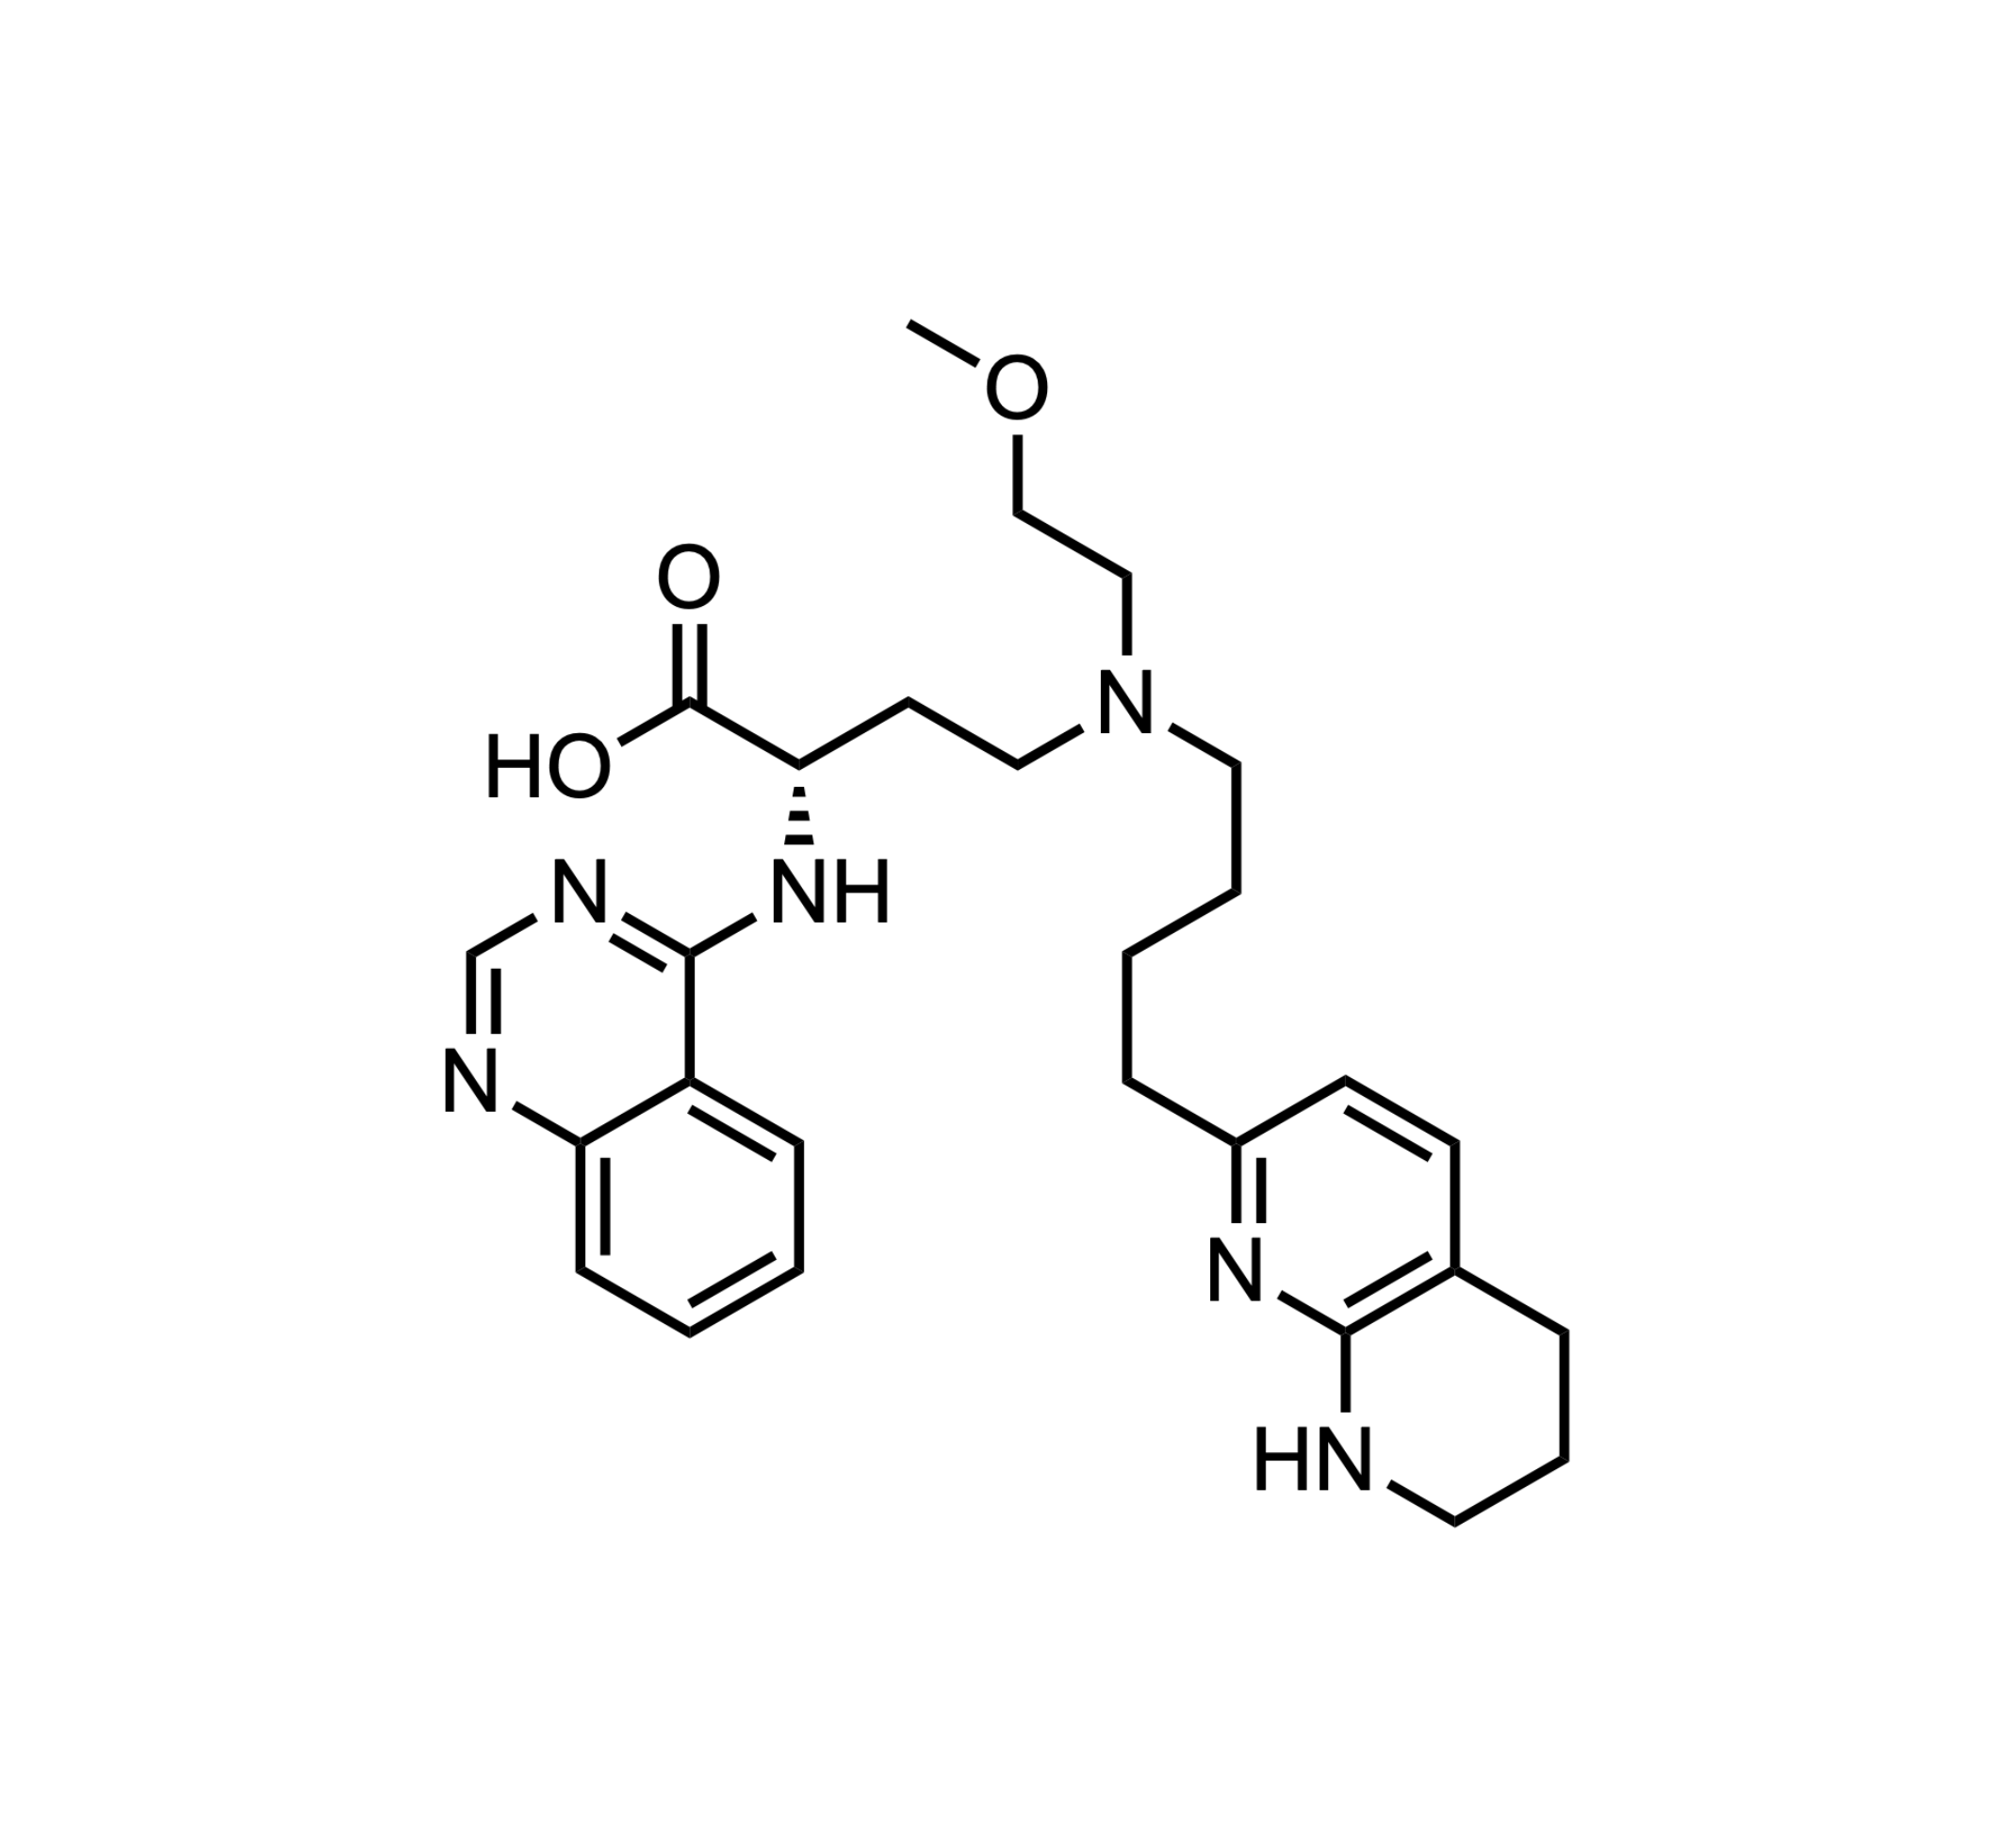 bexotegrast chemical structure oral, dual-selective αvβ6/αvβ1 integrin inhibitor - Pliant Therapeutics, South San Francisco, CA||||||||||||